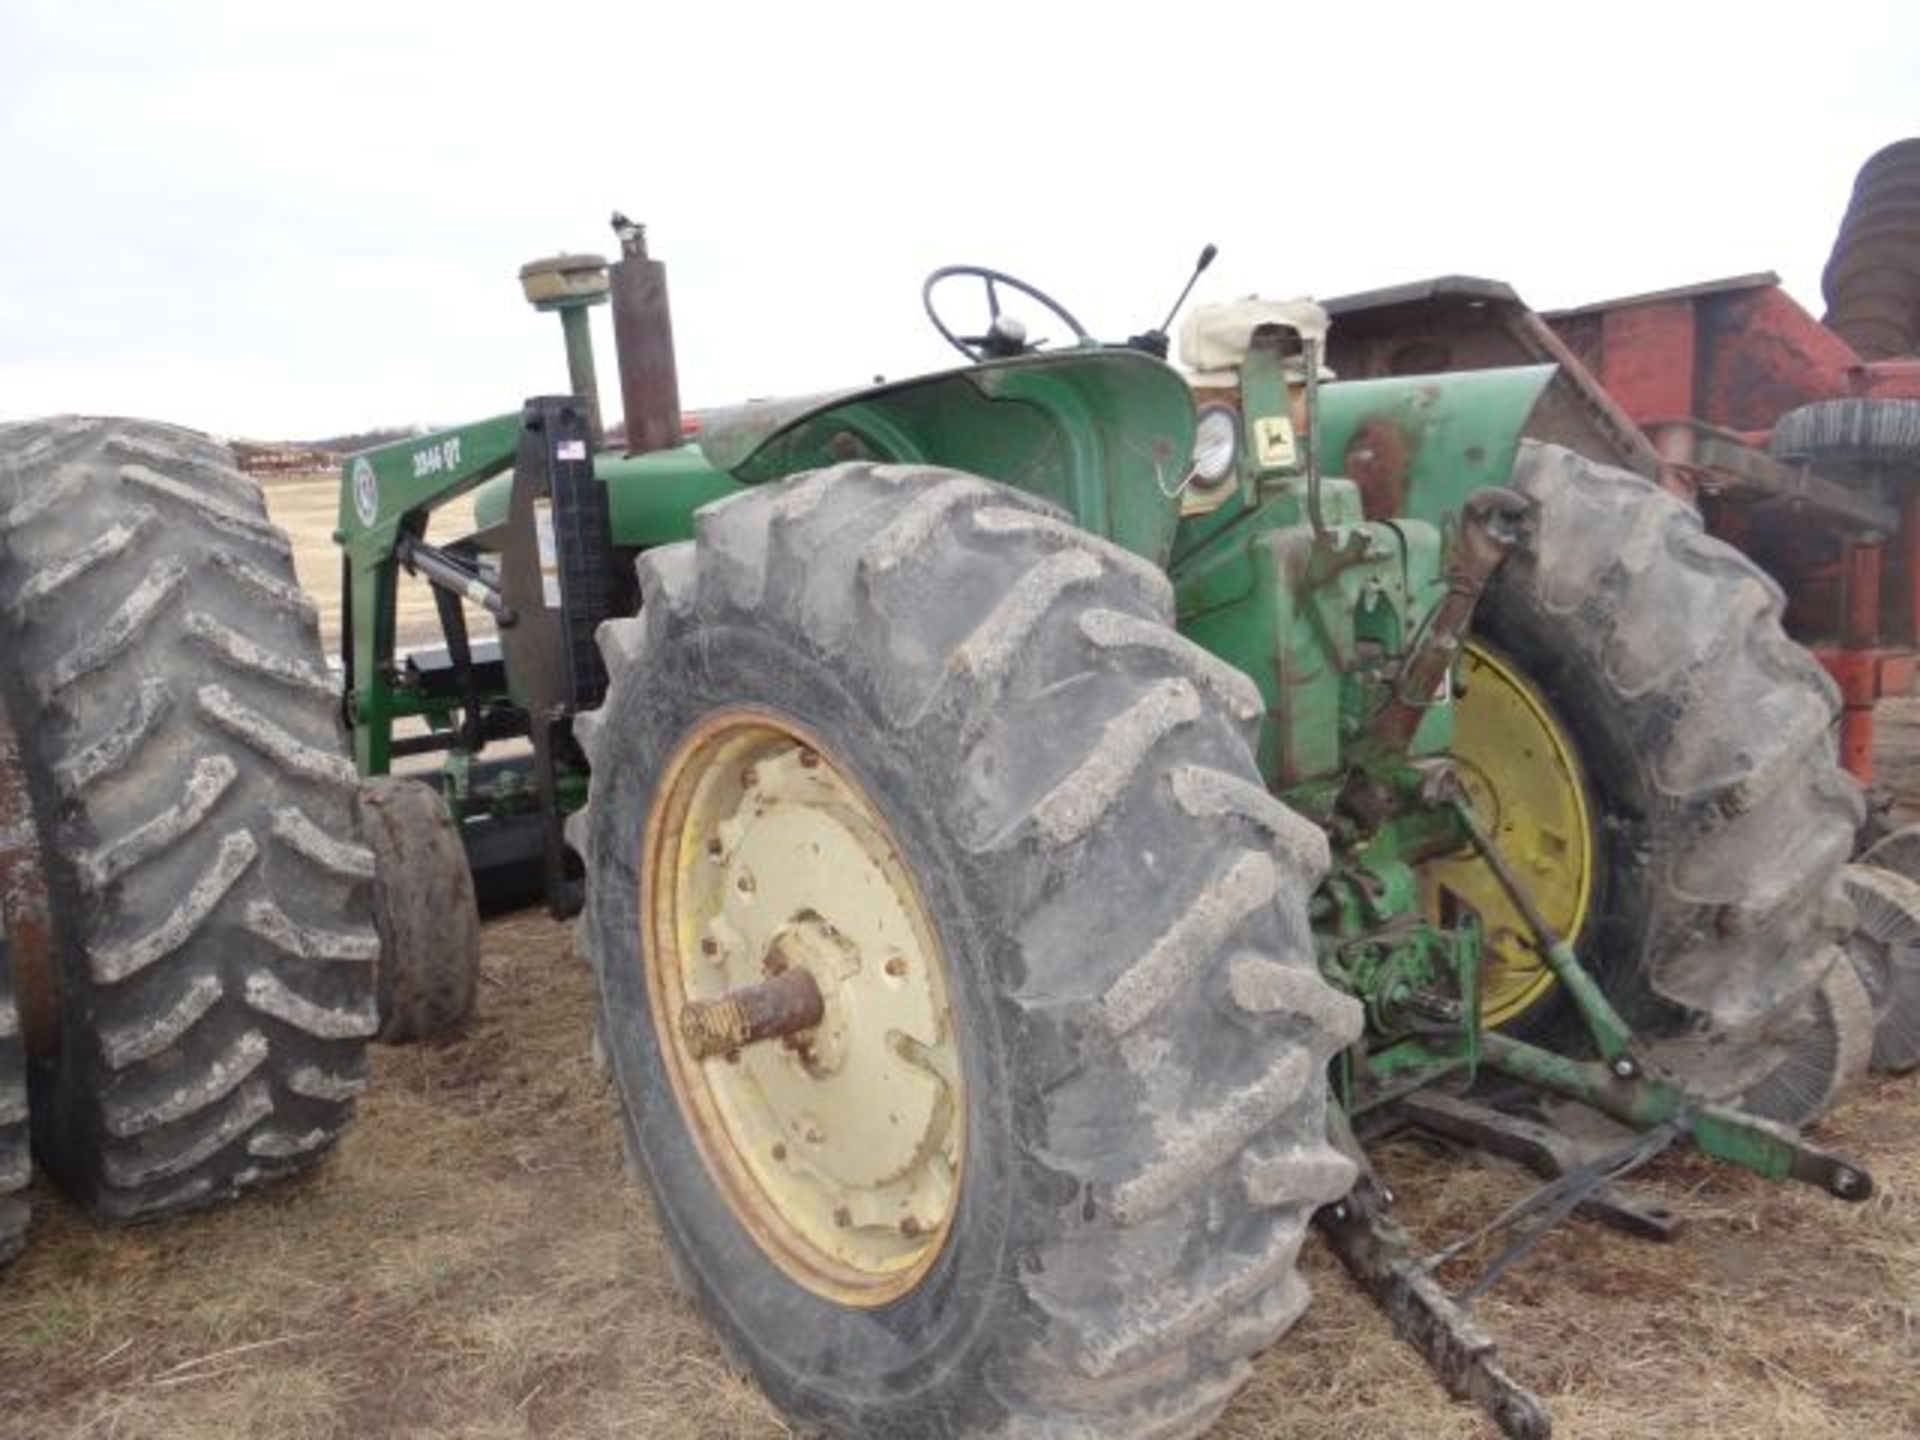 JD 4020 Tractor, 1967 Diesel, Powershift, Hrs are Correct, Trans Overhauled, 300 hrs ago, w/ Bush - Image 3 of 5